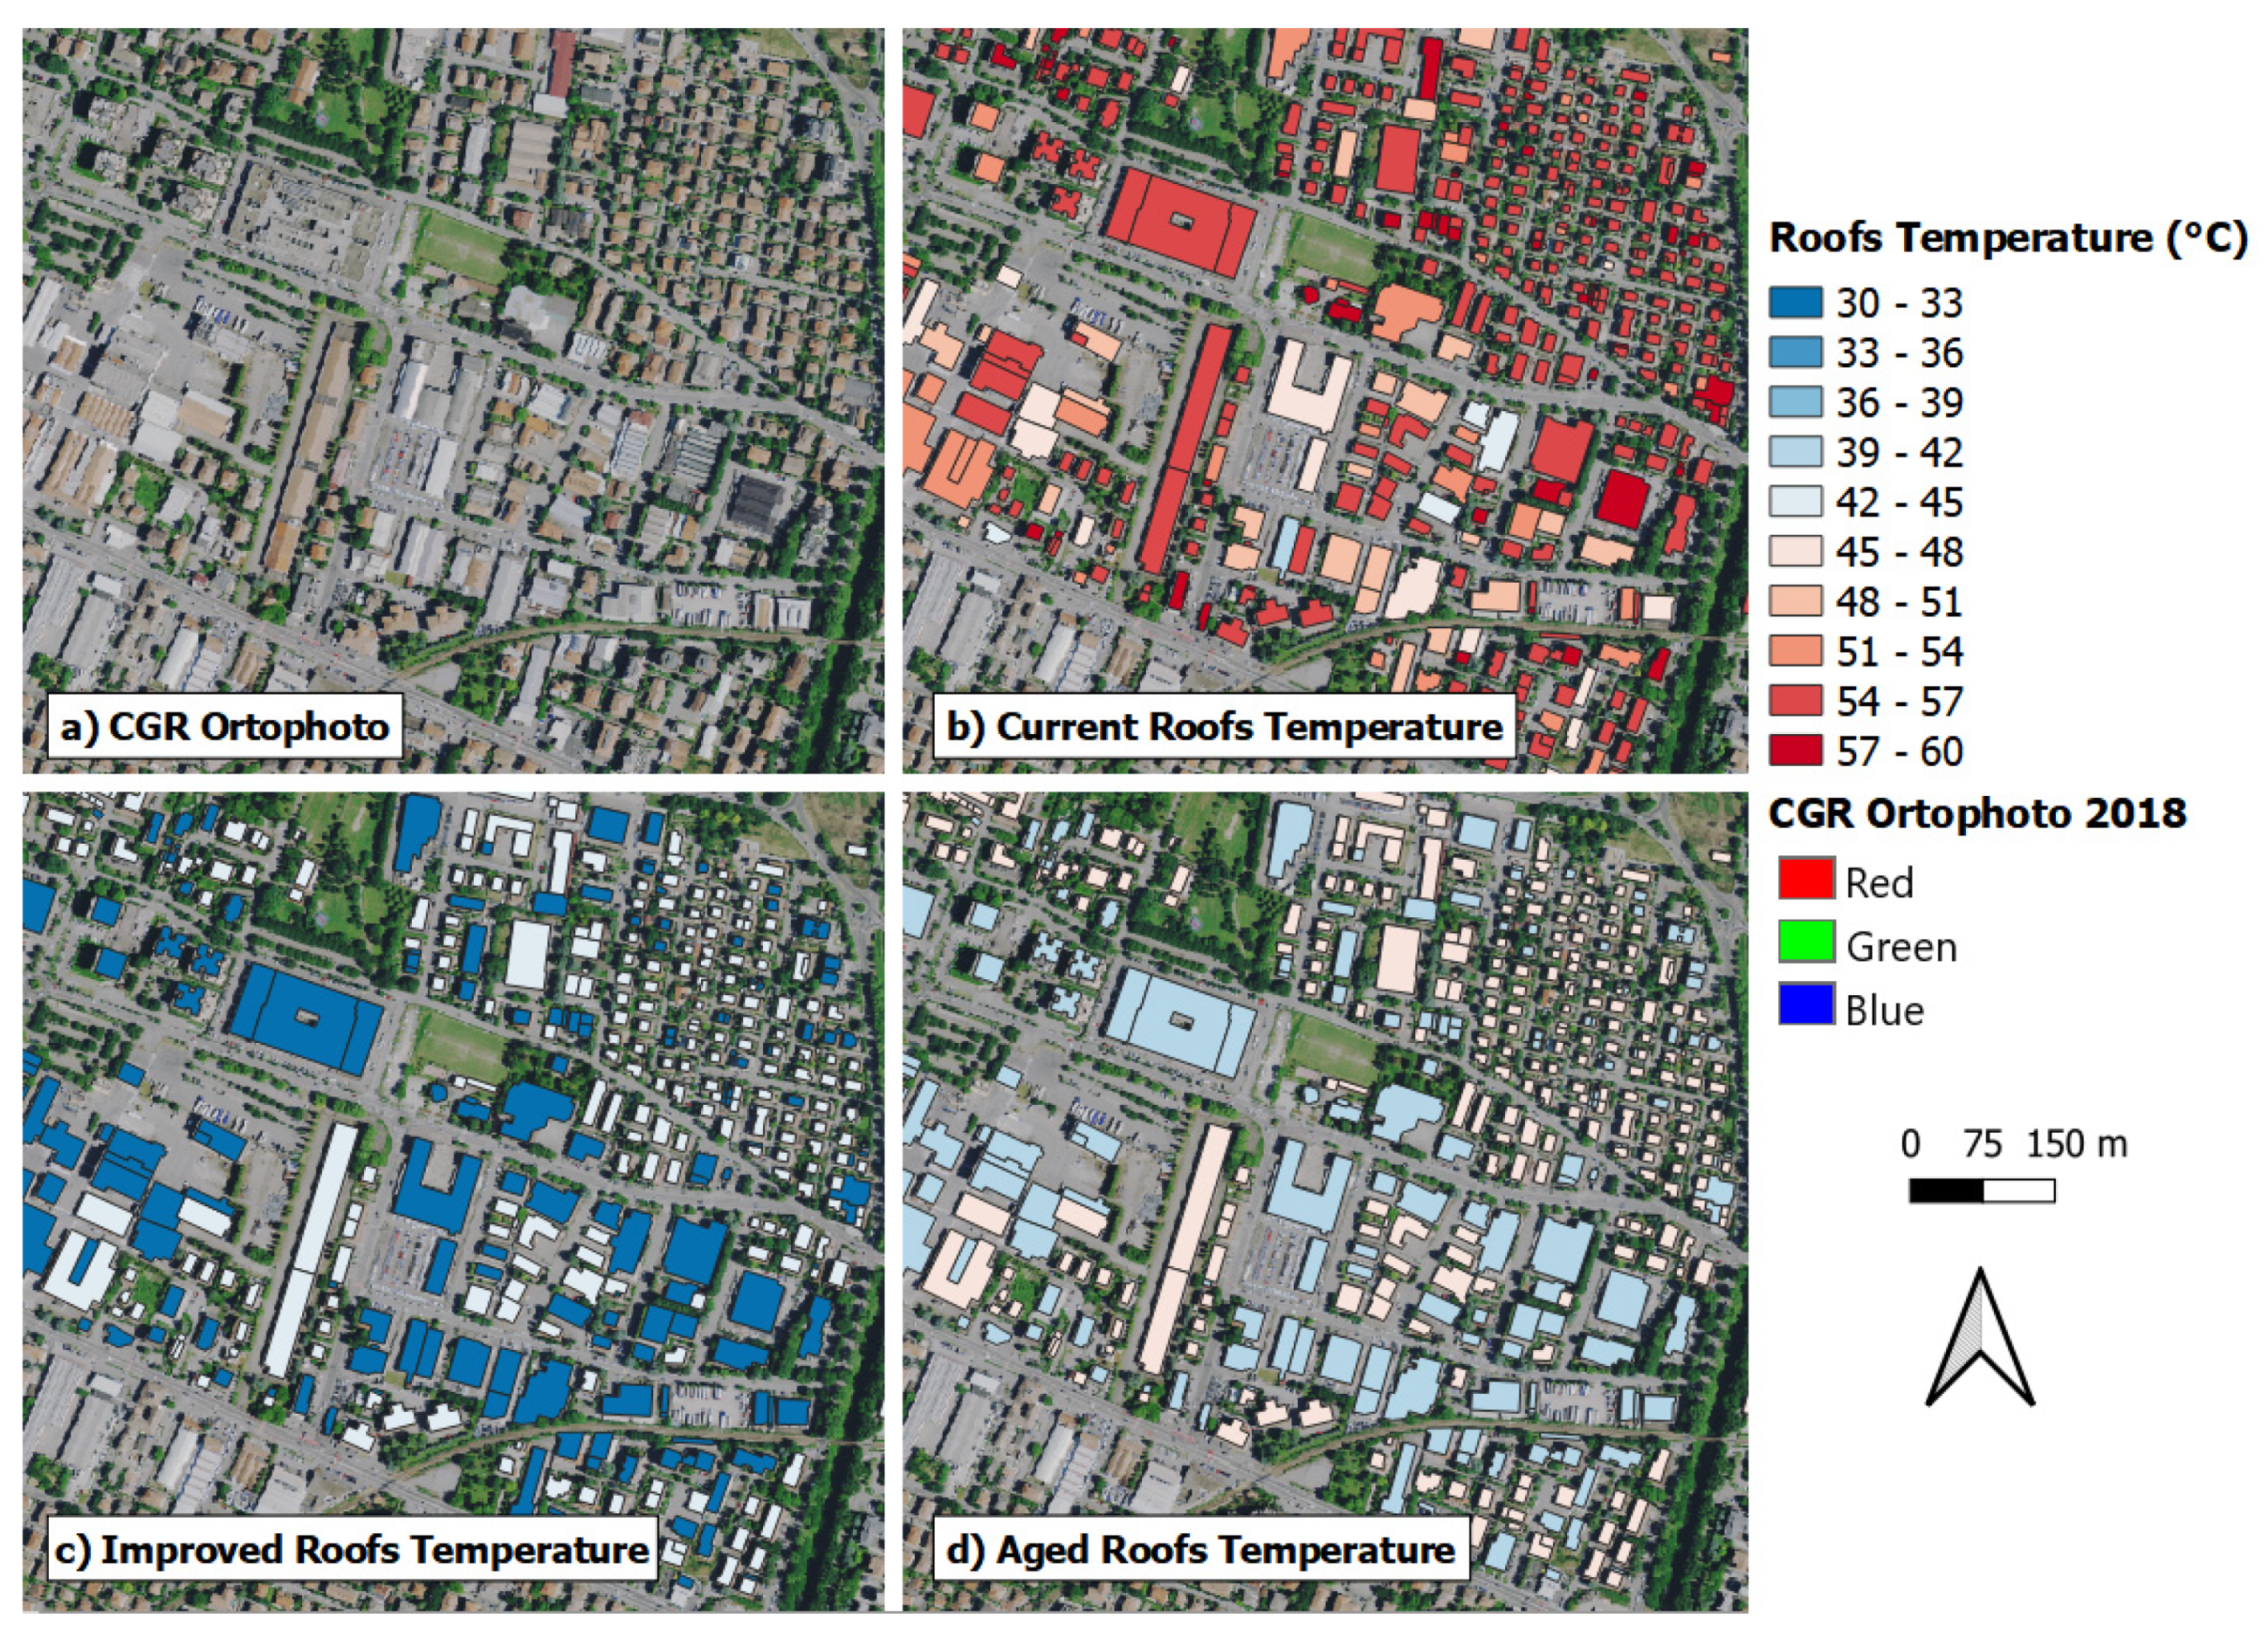 Atmosphere Free Full-Text | Identification of SUHI in Urban Areas by Remote Sensing Data and Mitigation Hypothesis Solar Reflective Materials | HTML